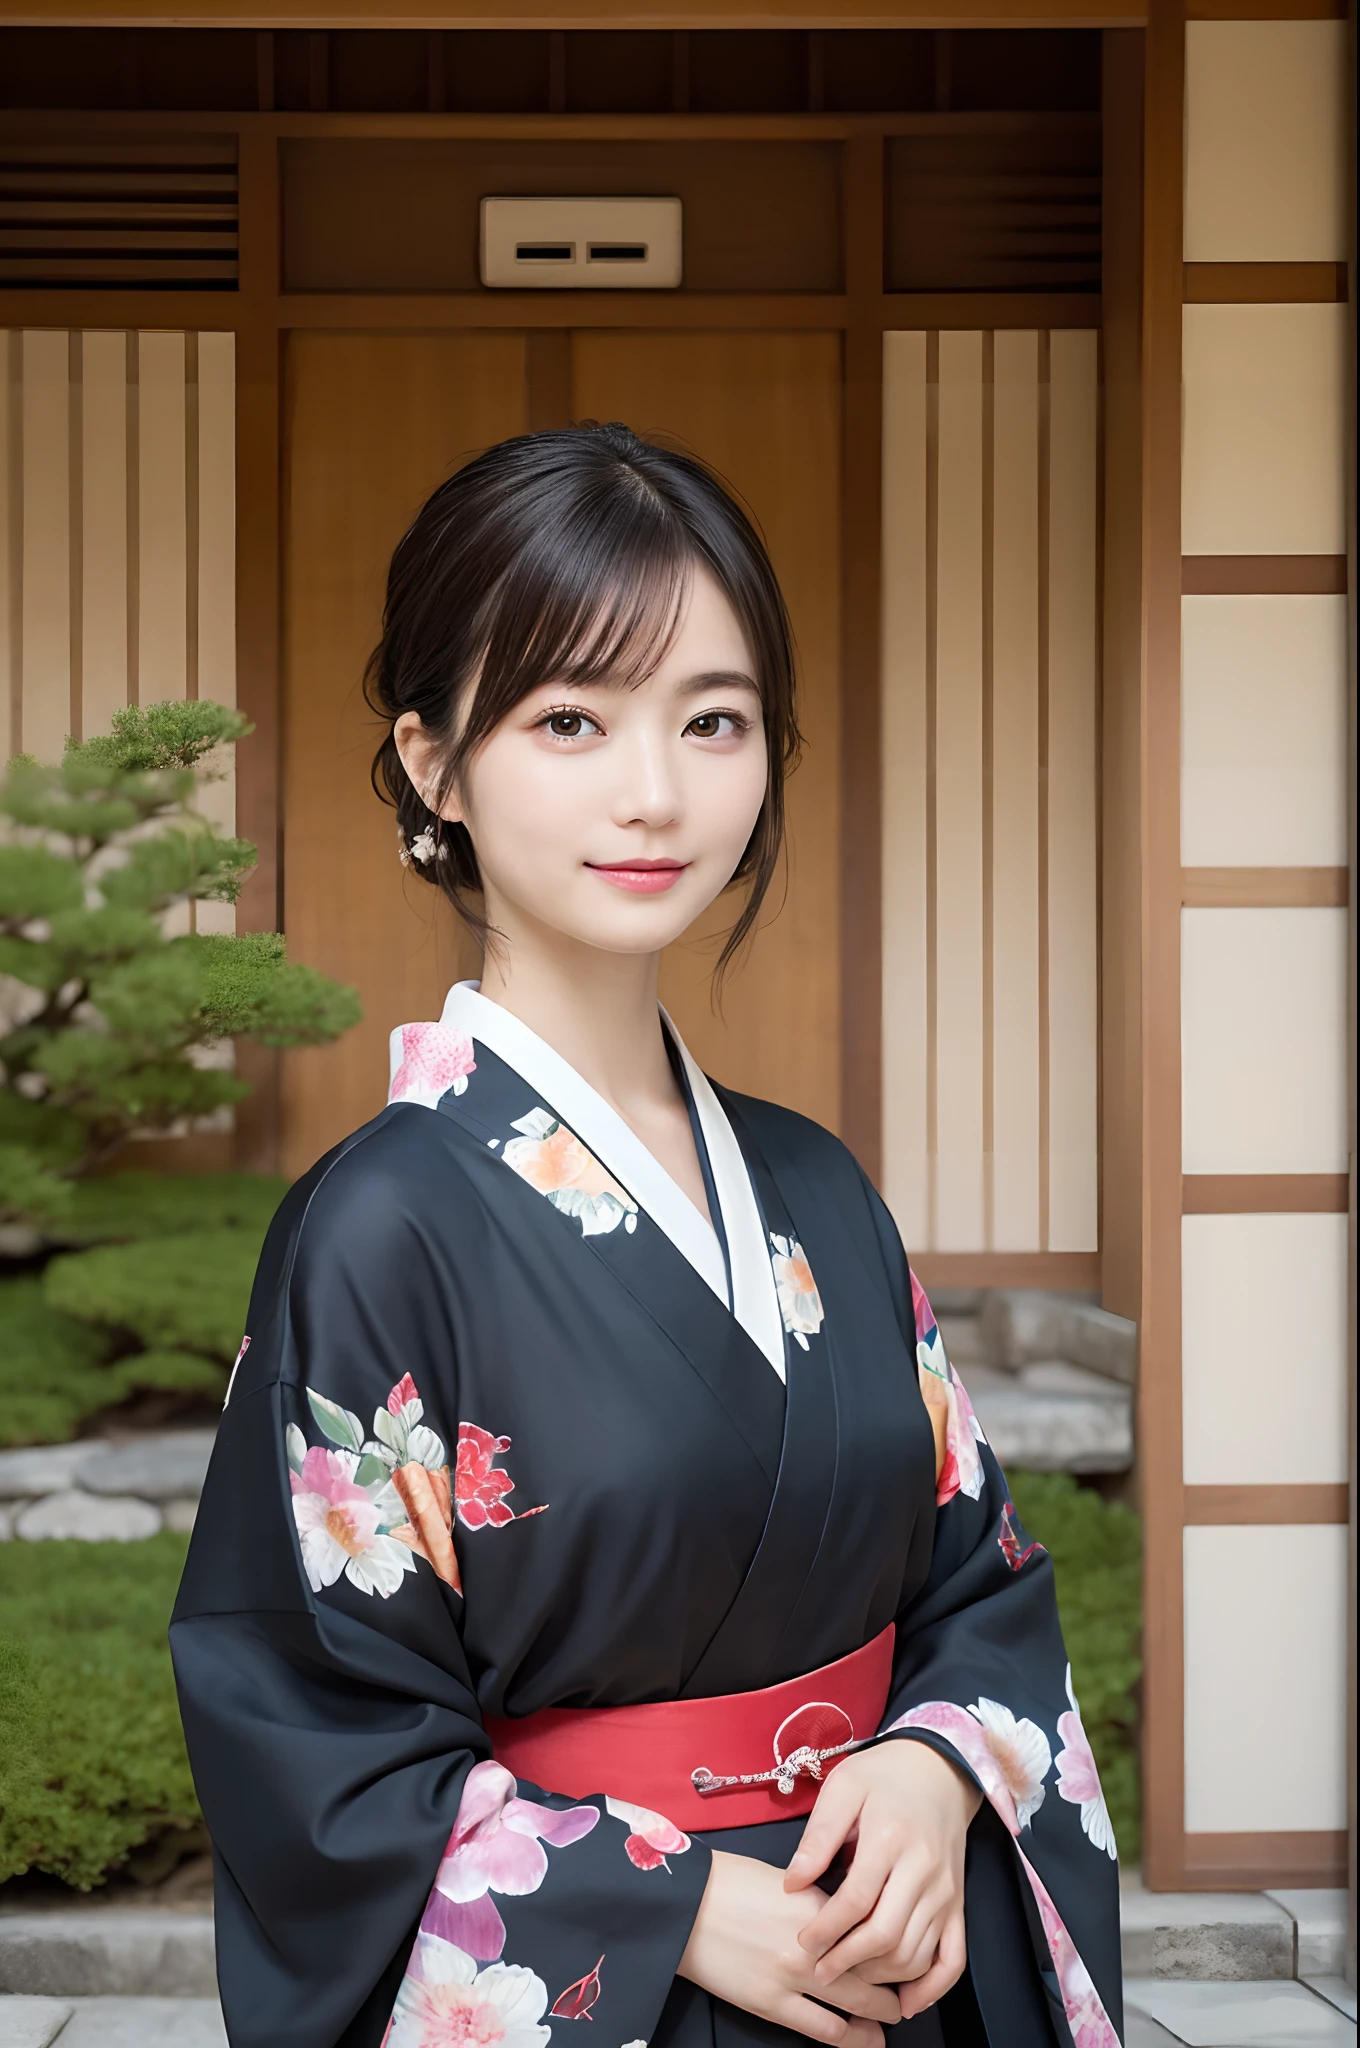 Masterpiece, Best Quality, ((1womanl)), illstration, Ultra-detailed, finely detail, hight resolution, 8K quality wallpapers, Perfect dynamic composition, Beautiful detailed eyes, Kimono, Well-formed kimono appearance, (Black shorthair), A slight smil, Looking at the camera, Kyoto Uzumasa Studio Park, Japan castle town, Japanese garden, Tea room, Tea ceremony